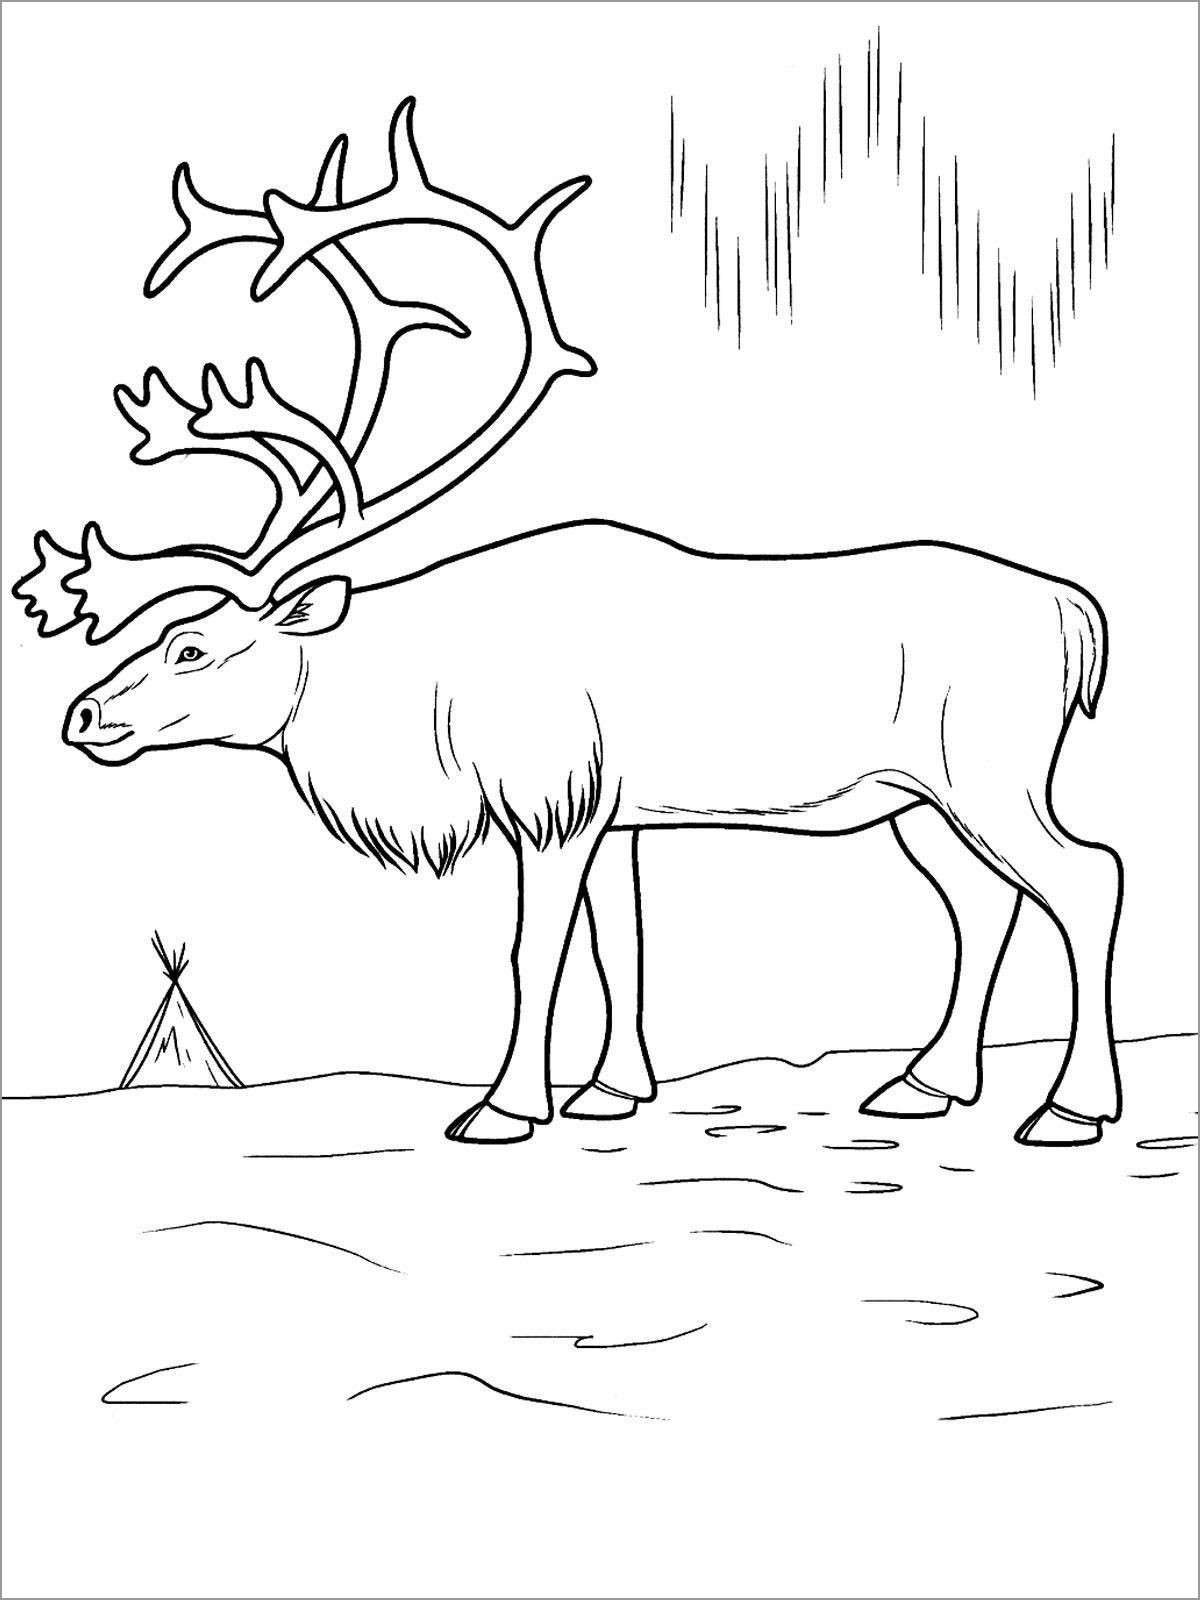 9600 Coloring Pages Arctic Animals  HD